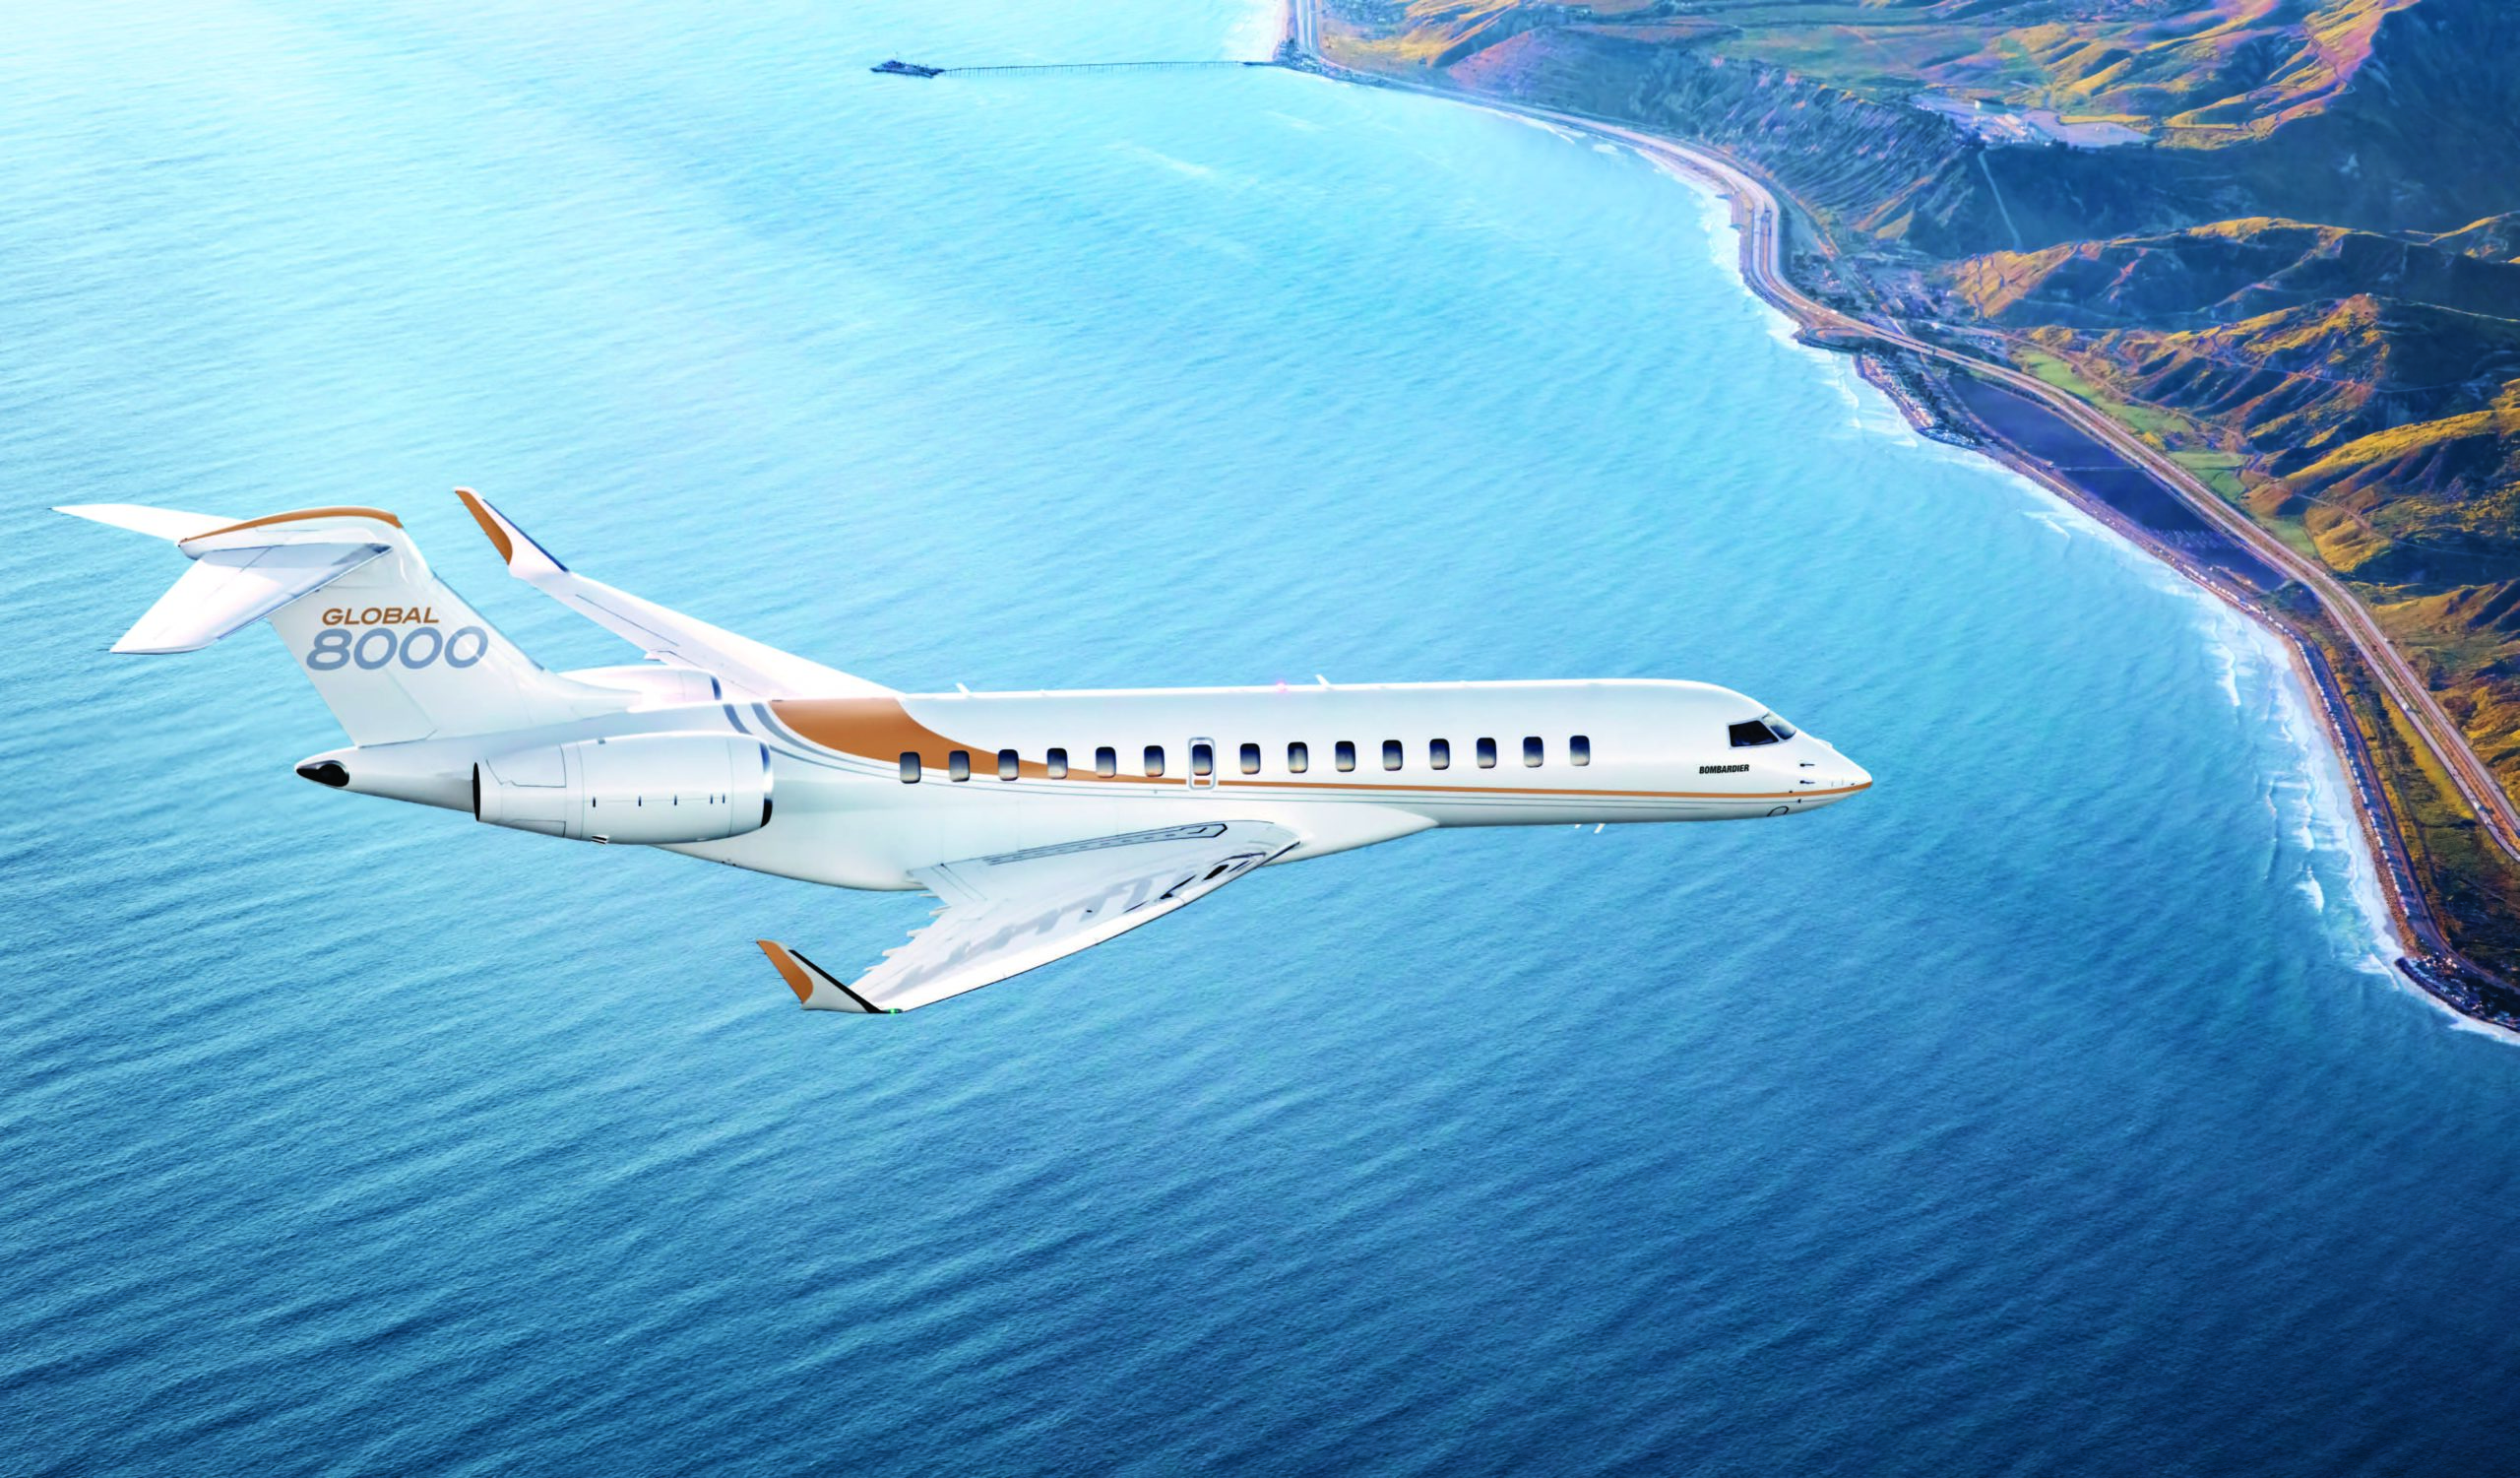 ULTRA-LONG-RANGE BUSINESS PRIVATE JET BOMBARDIER IN THE SKY FLYING